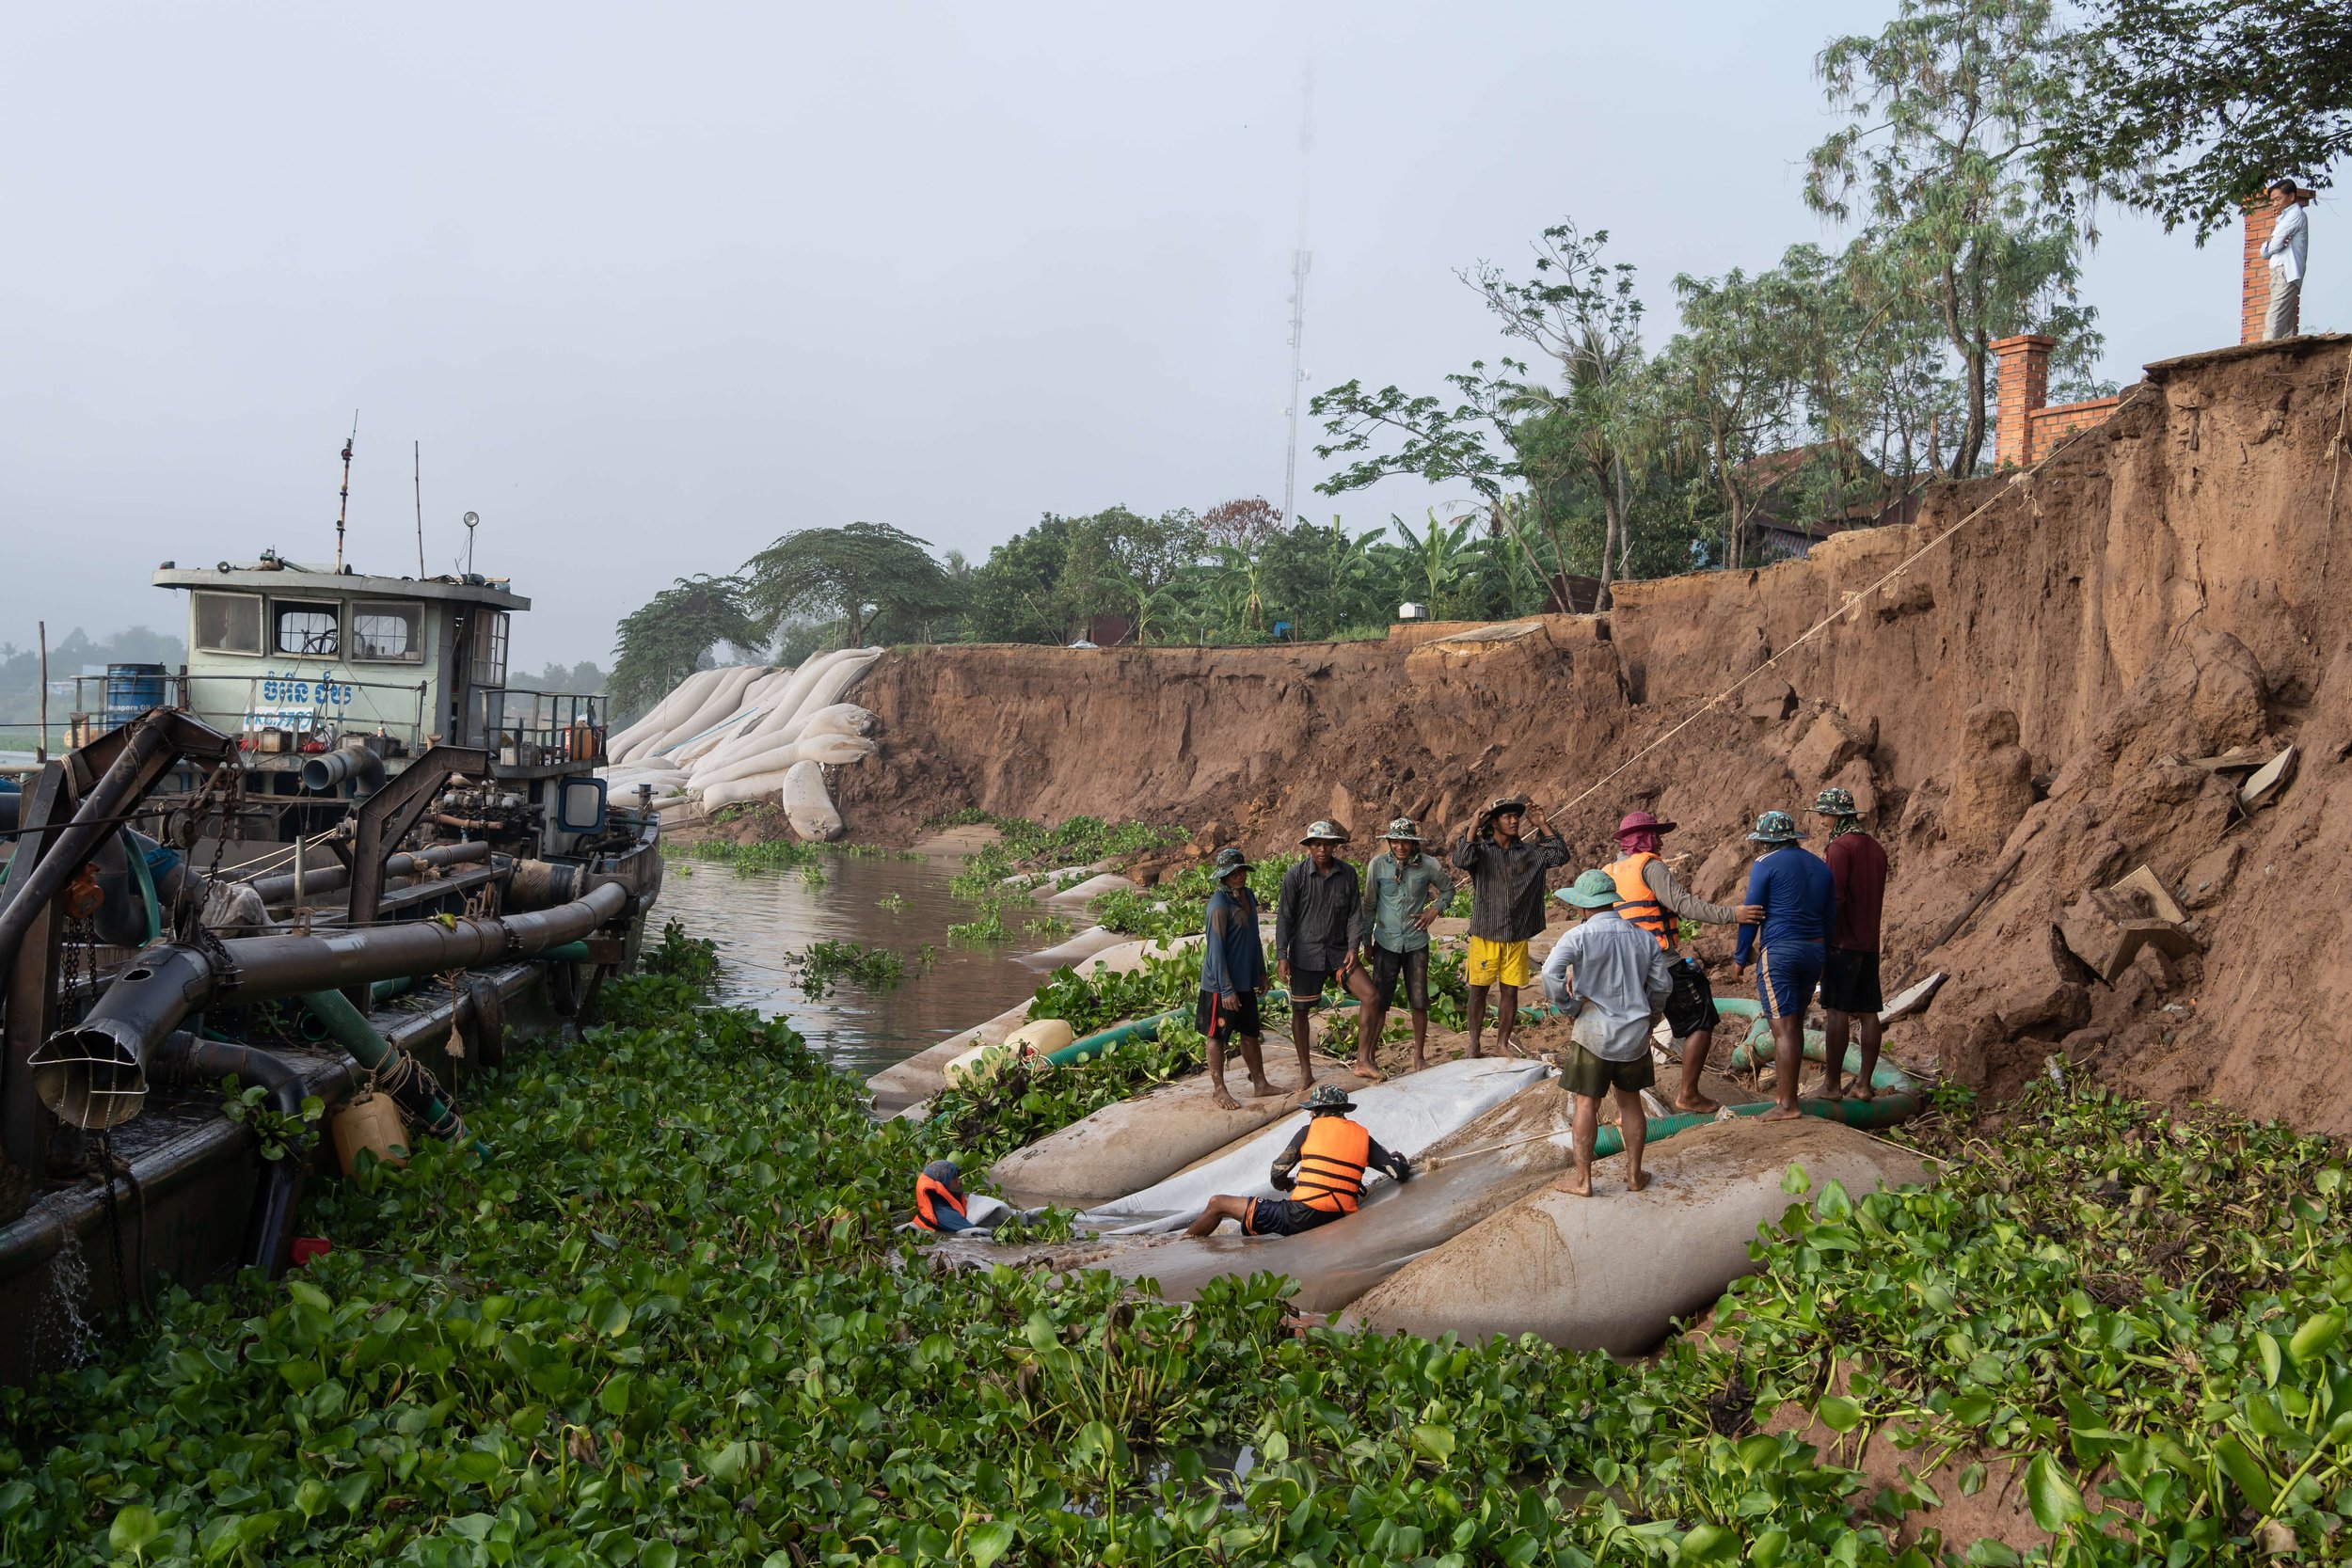  Workers fill bags with sand pumped from the Mekong to protect a very recent riverbank collapse in Boeung Leu village, Kandal Province, from further erosion. Eight families were impacted by the collapse, with four already relocated to the main road i